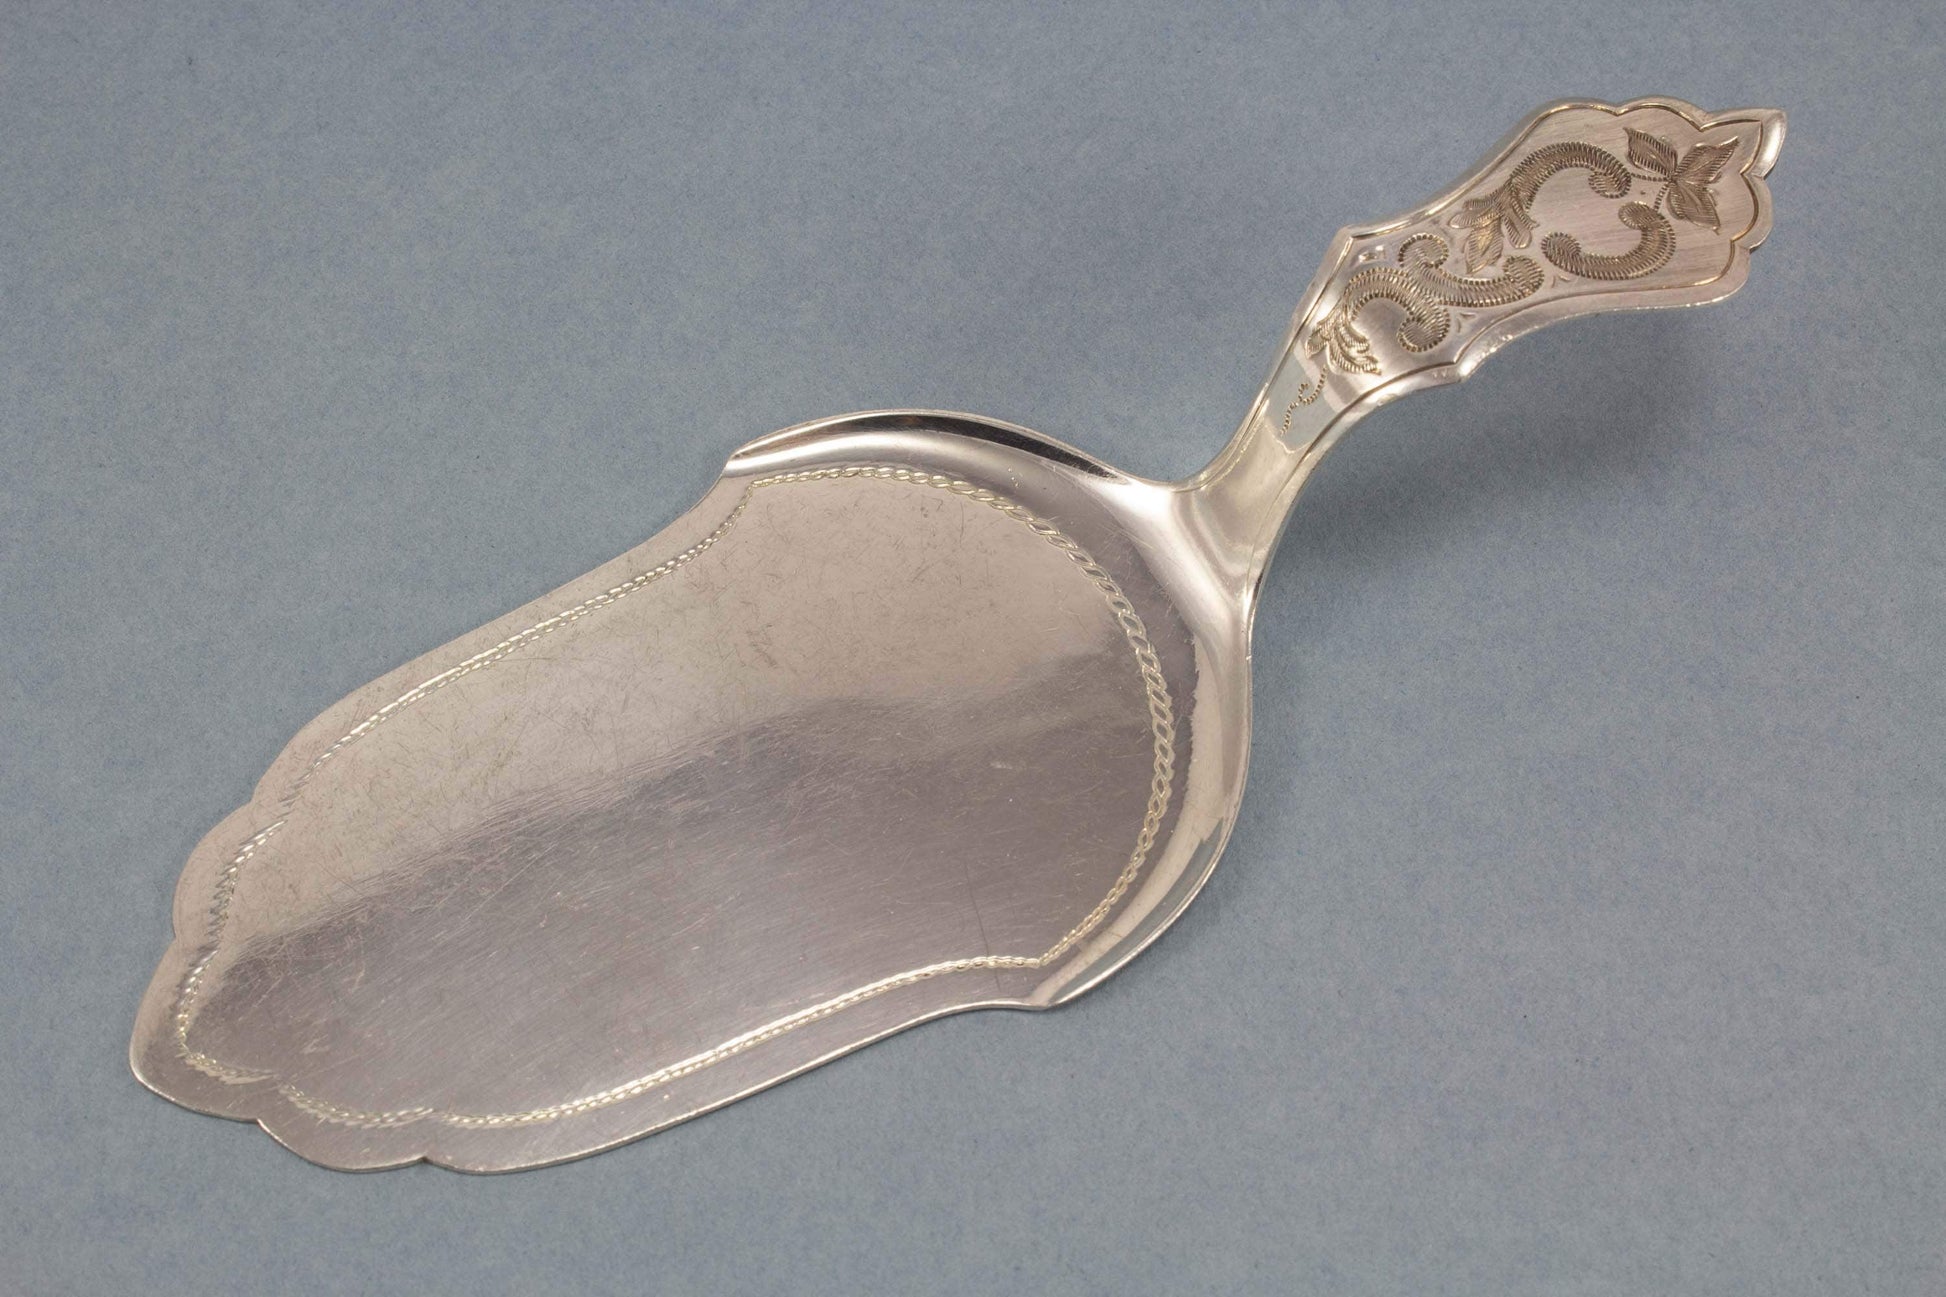 Beautiful small pastry server, silver plated